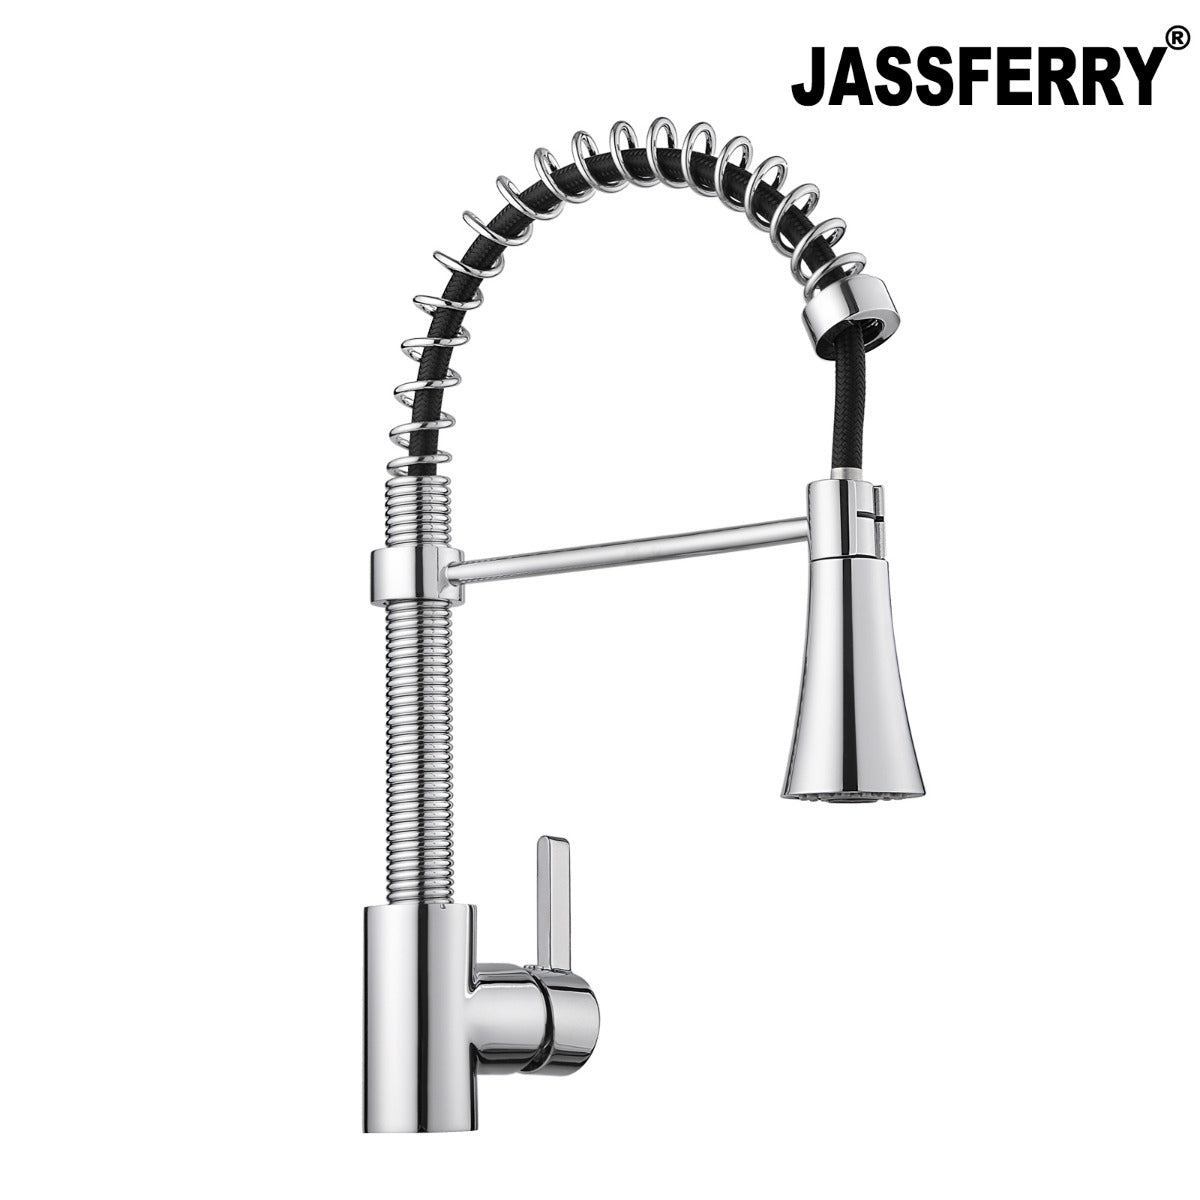 JassferryJASSFERRY Kitchen Sink Mixer Tap with Pull Out Spray Swivel Spout Pull DownKitchen taps